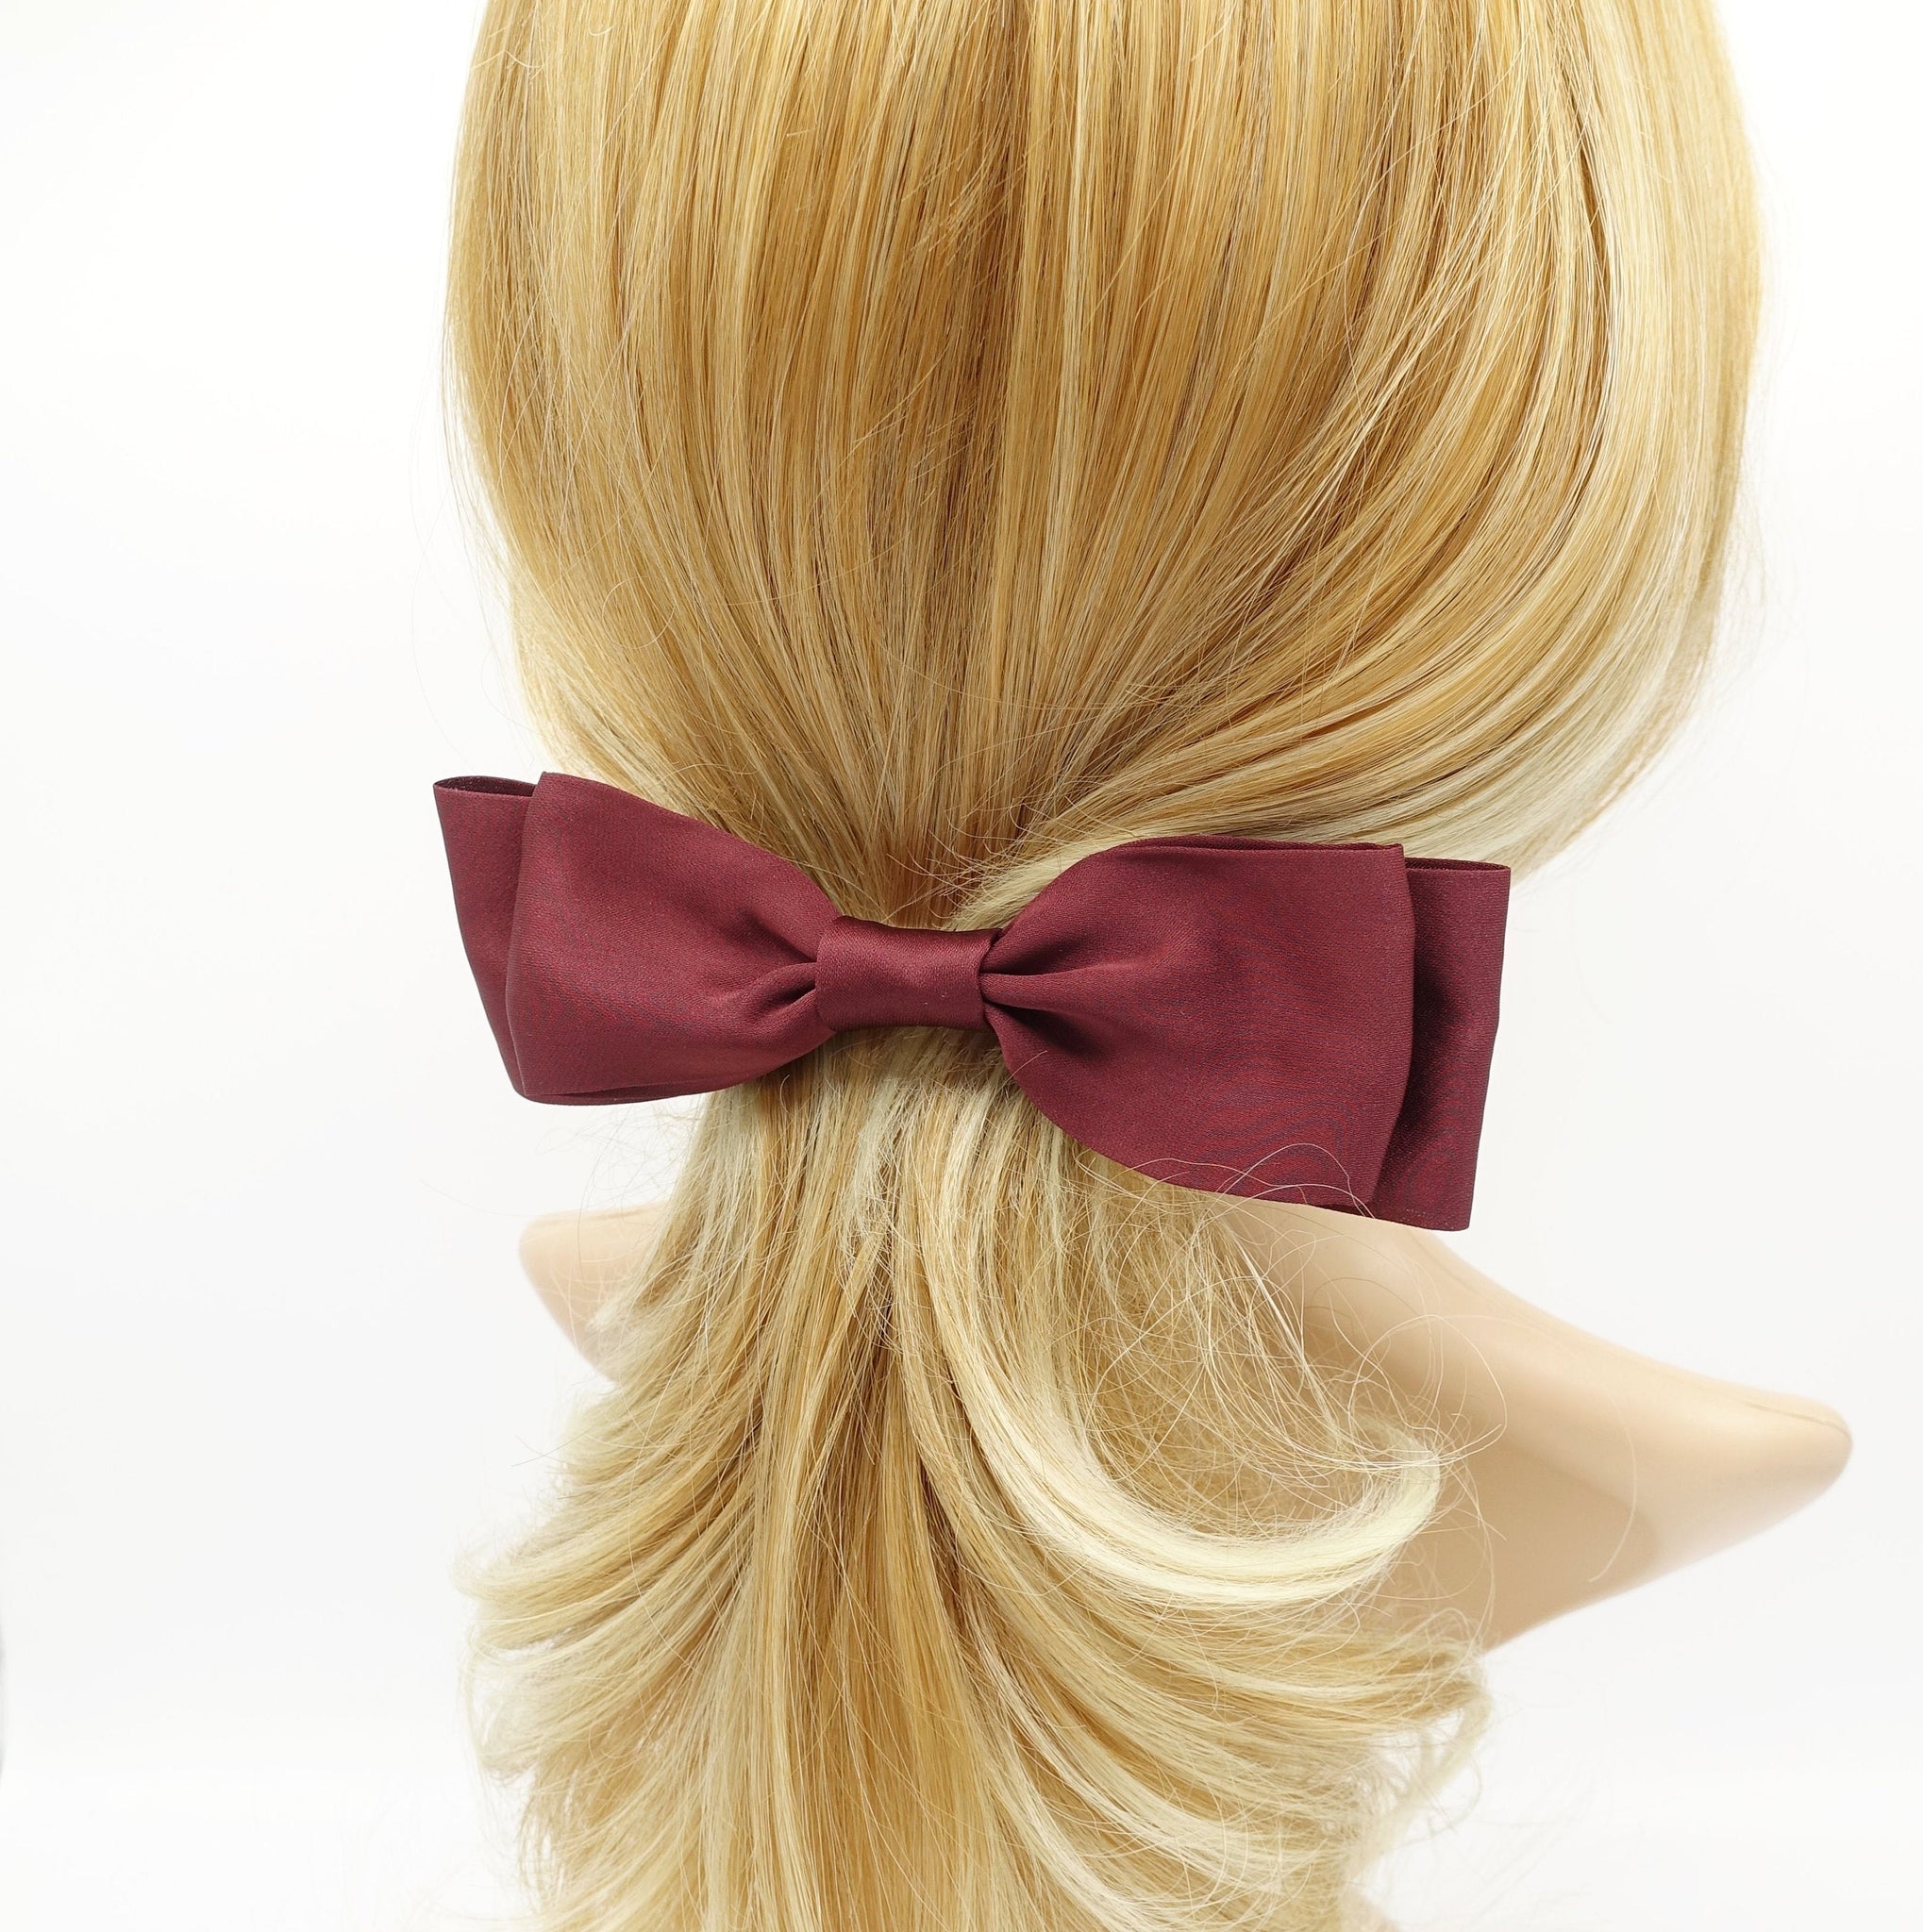 veryshine.com Barrette (Bow) Red wine narrow hair bow layered Autumn hair bow barrette for women